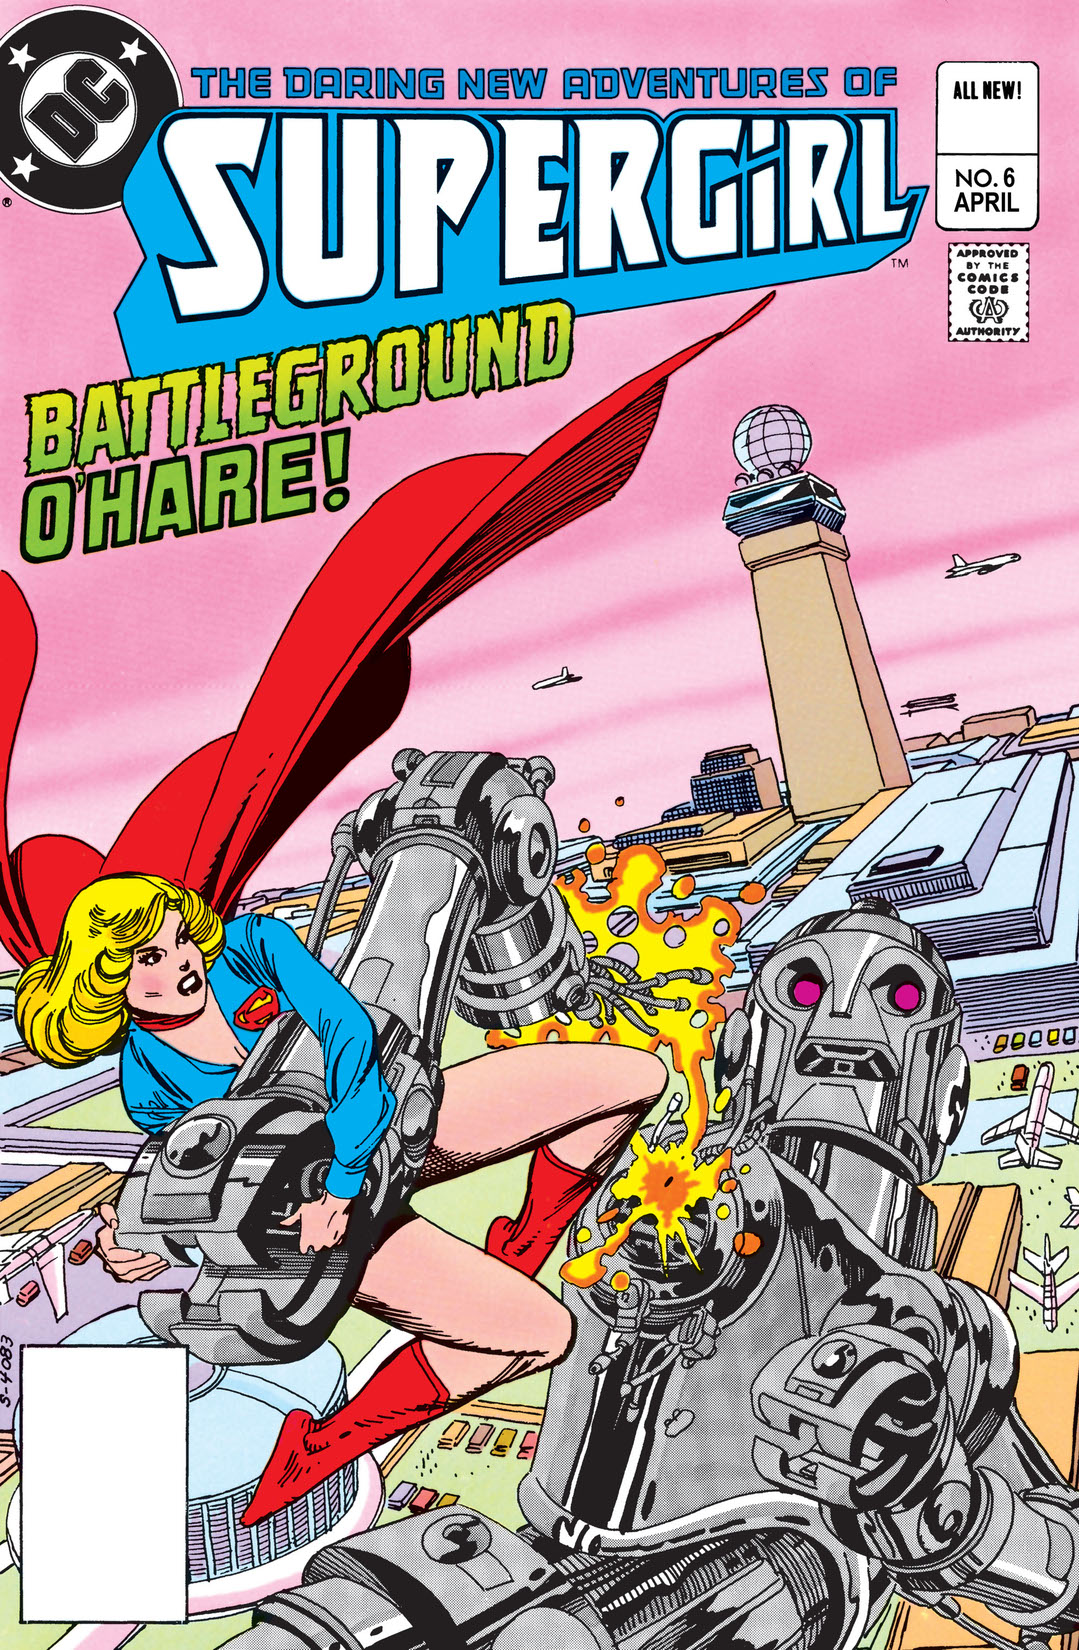 The Daring New Adventures of Supergirl #6 preview images